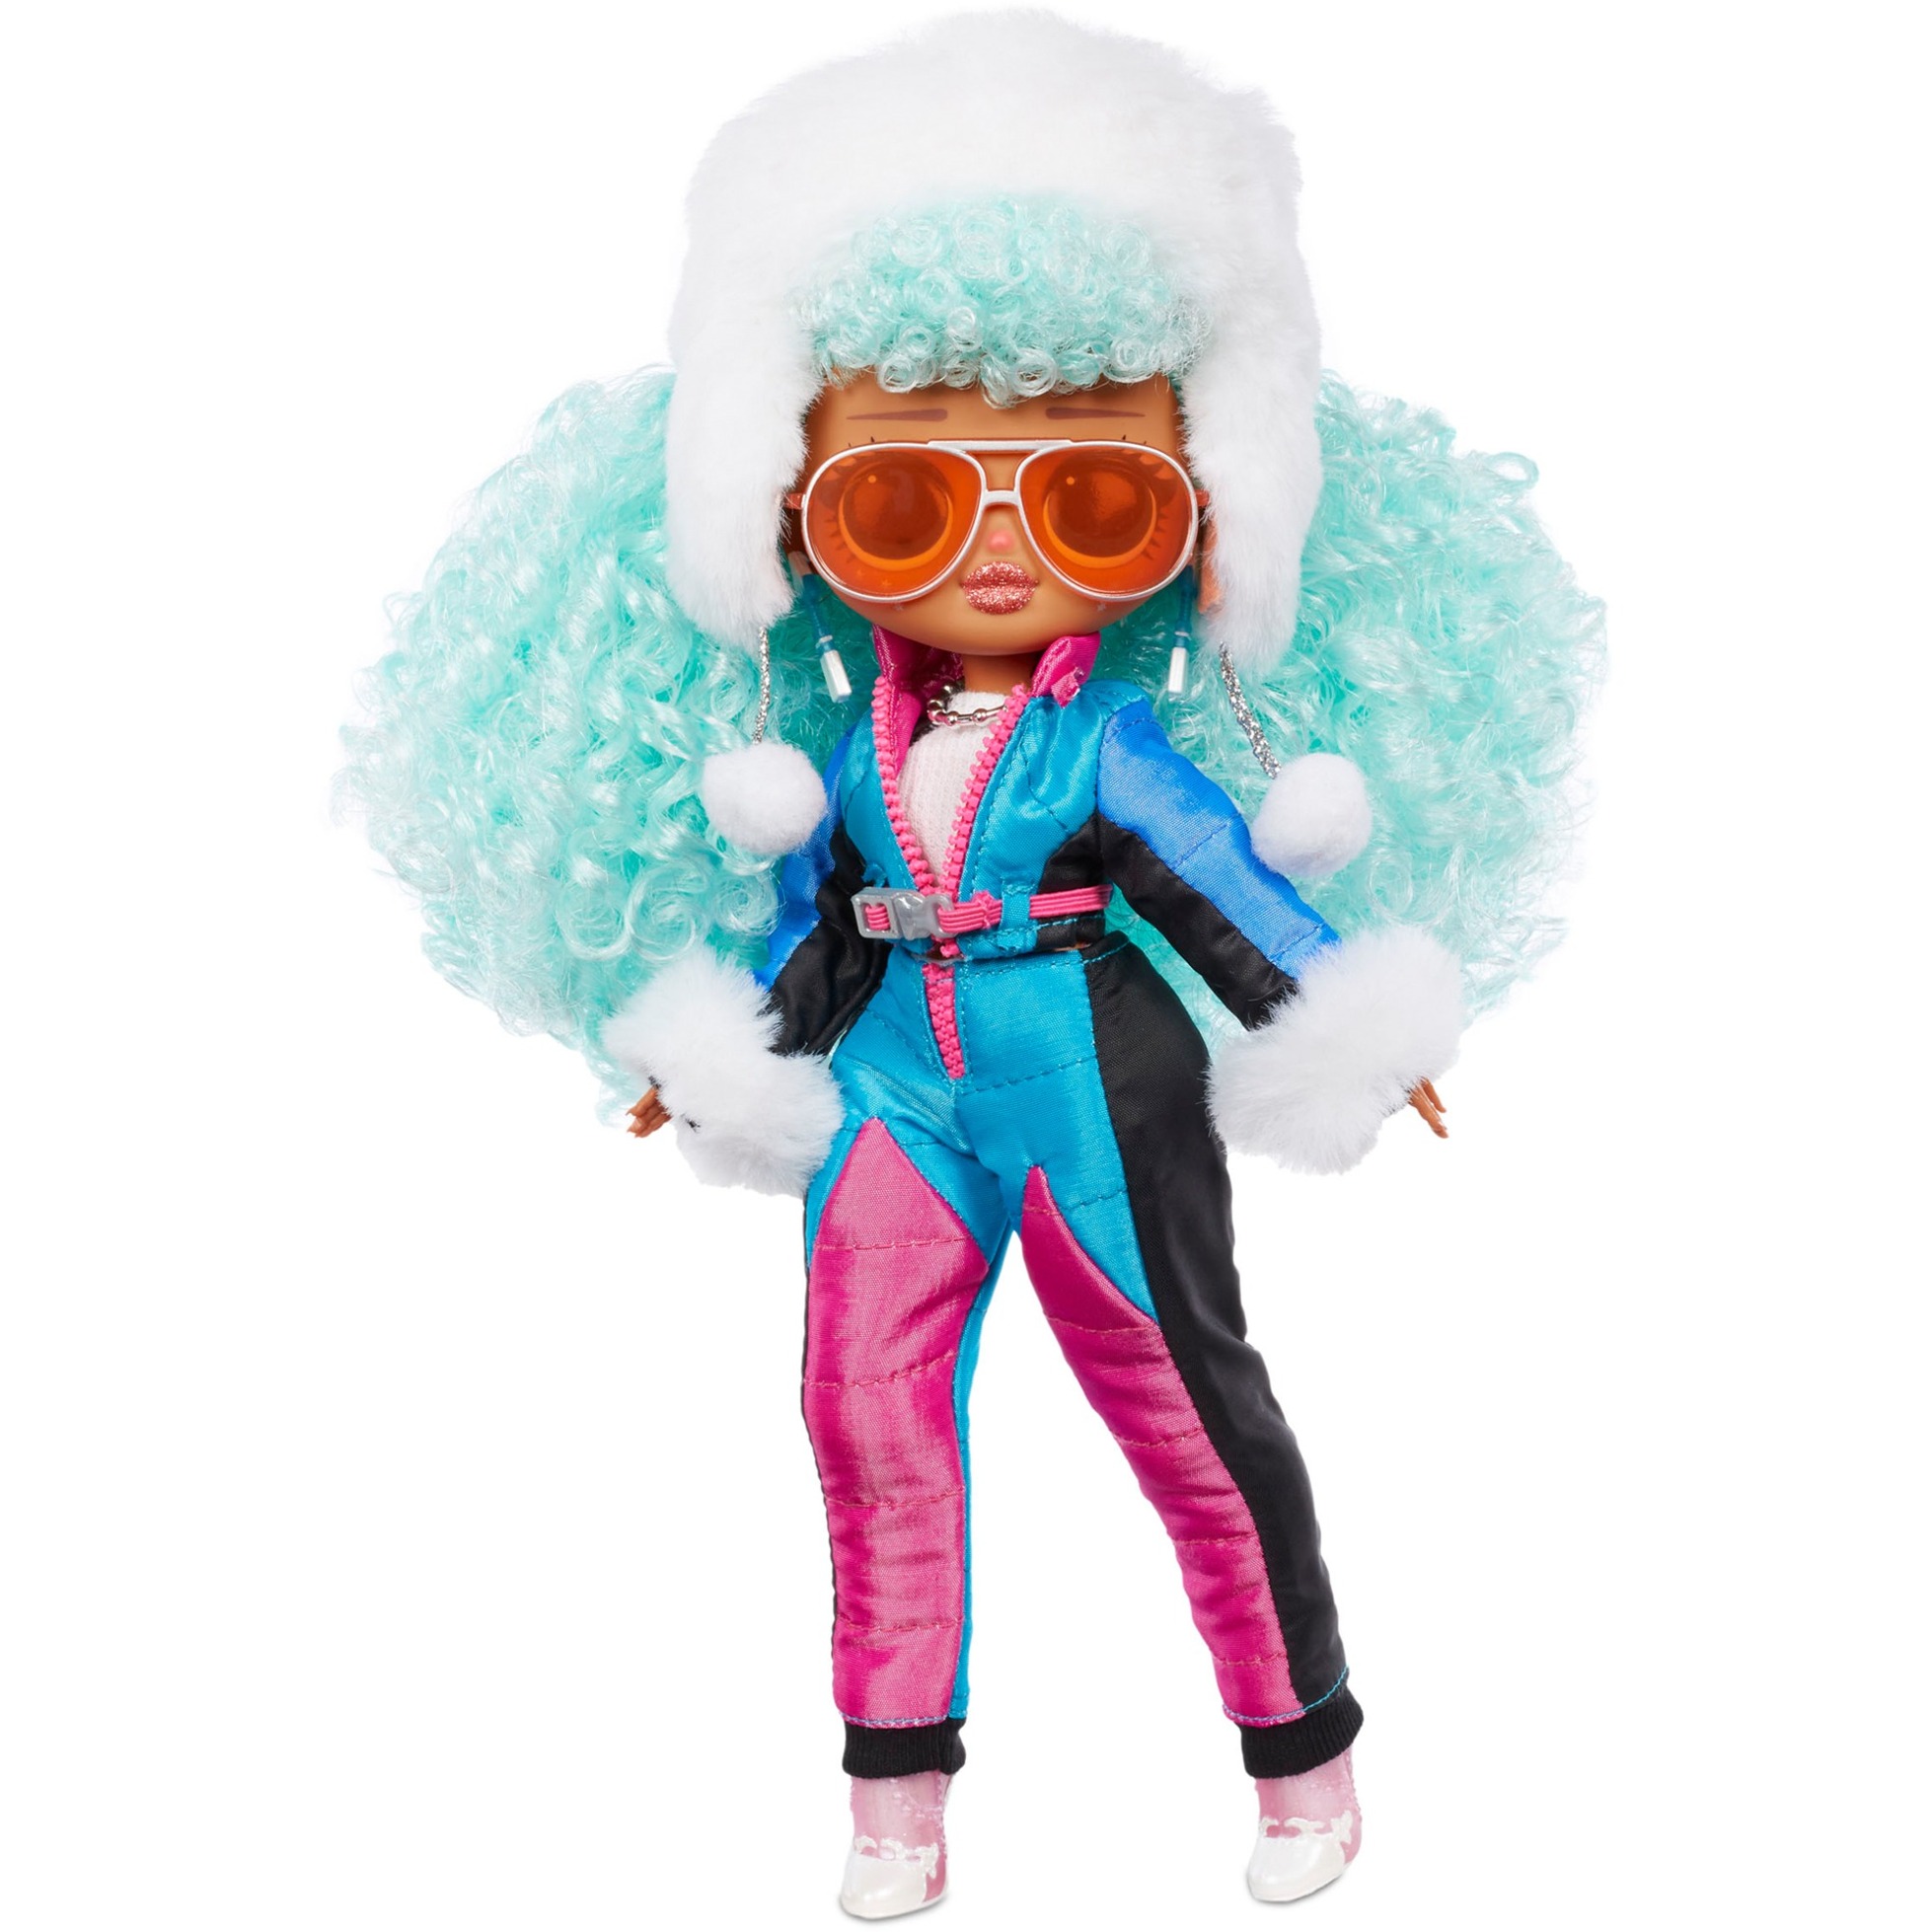 Image of Alternate - L.O.L. Surprise OMG Icy Gurl and Brr B.B., Puppe online einkaufen bei Alternate